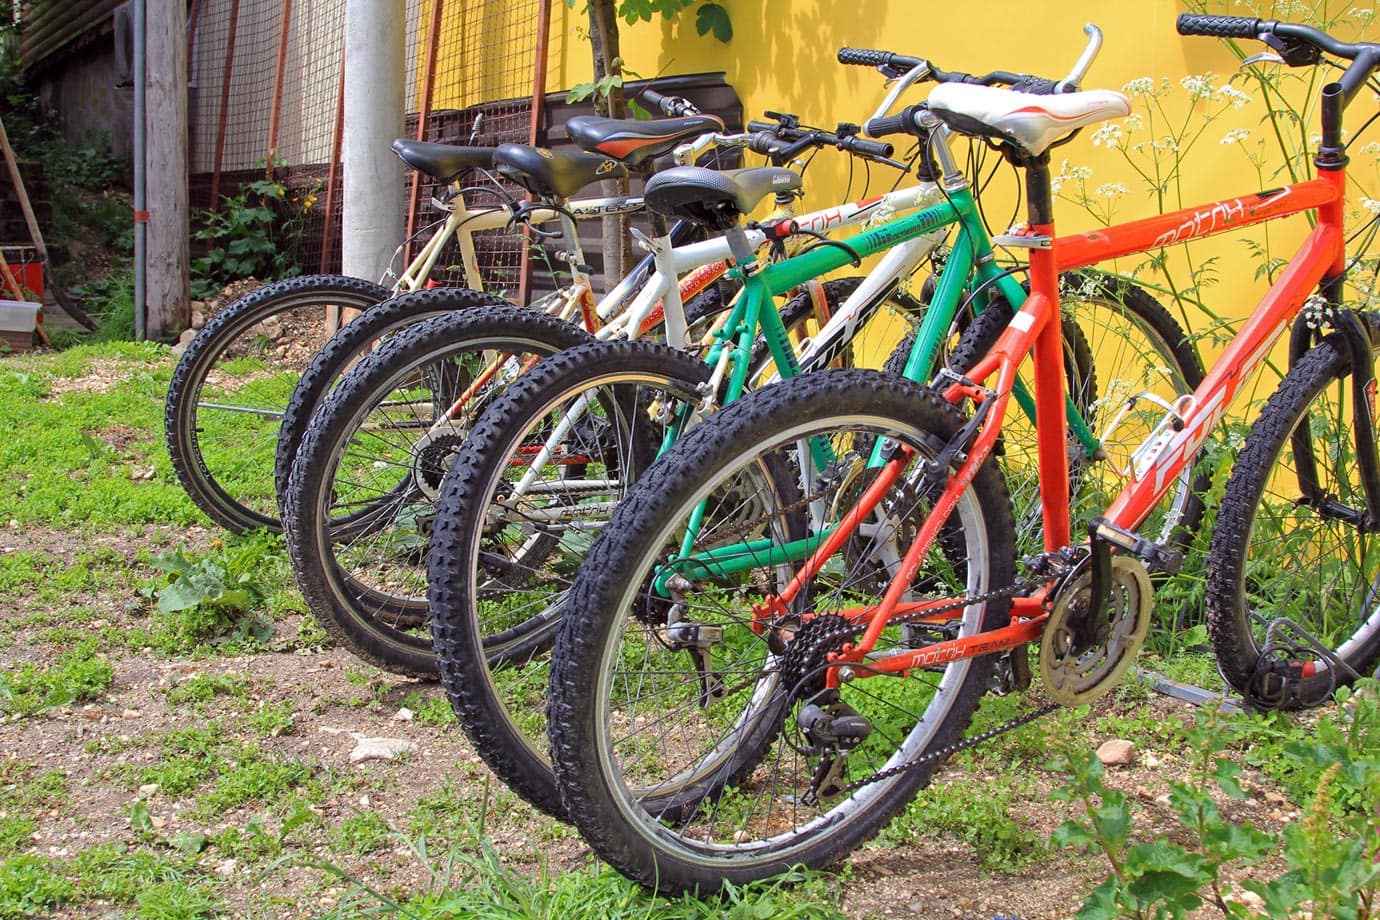 You can hire bikes for free at the Hikers Den Hostel